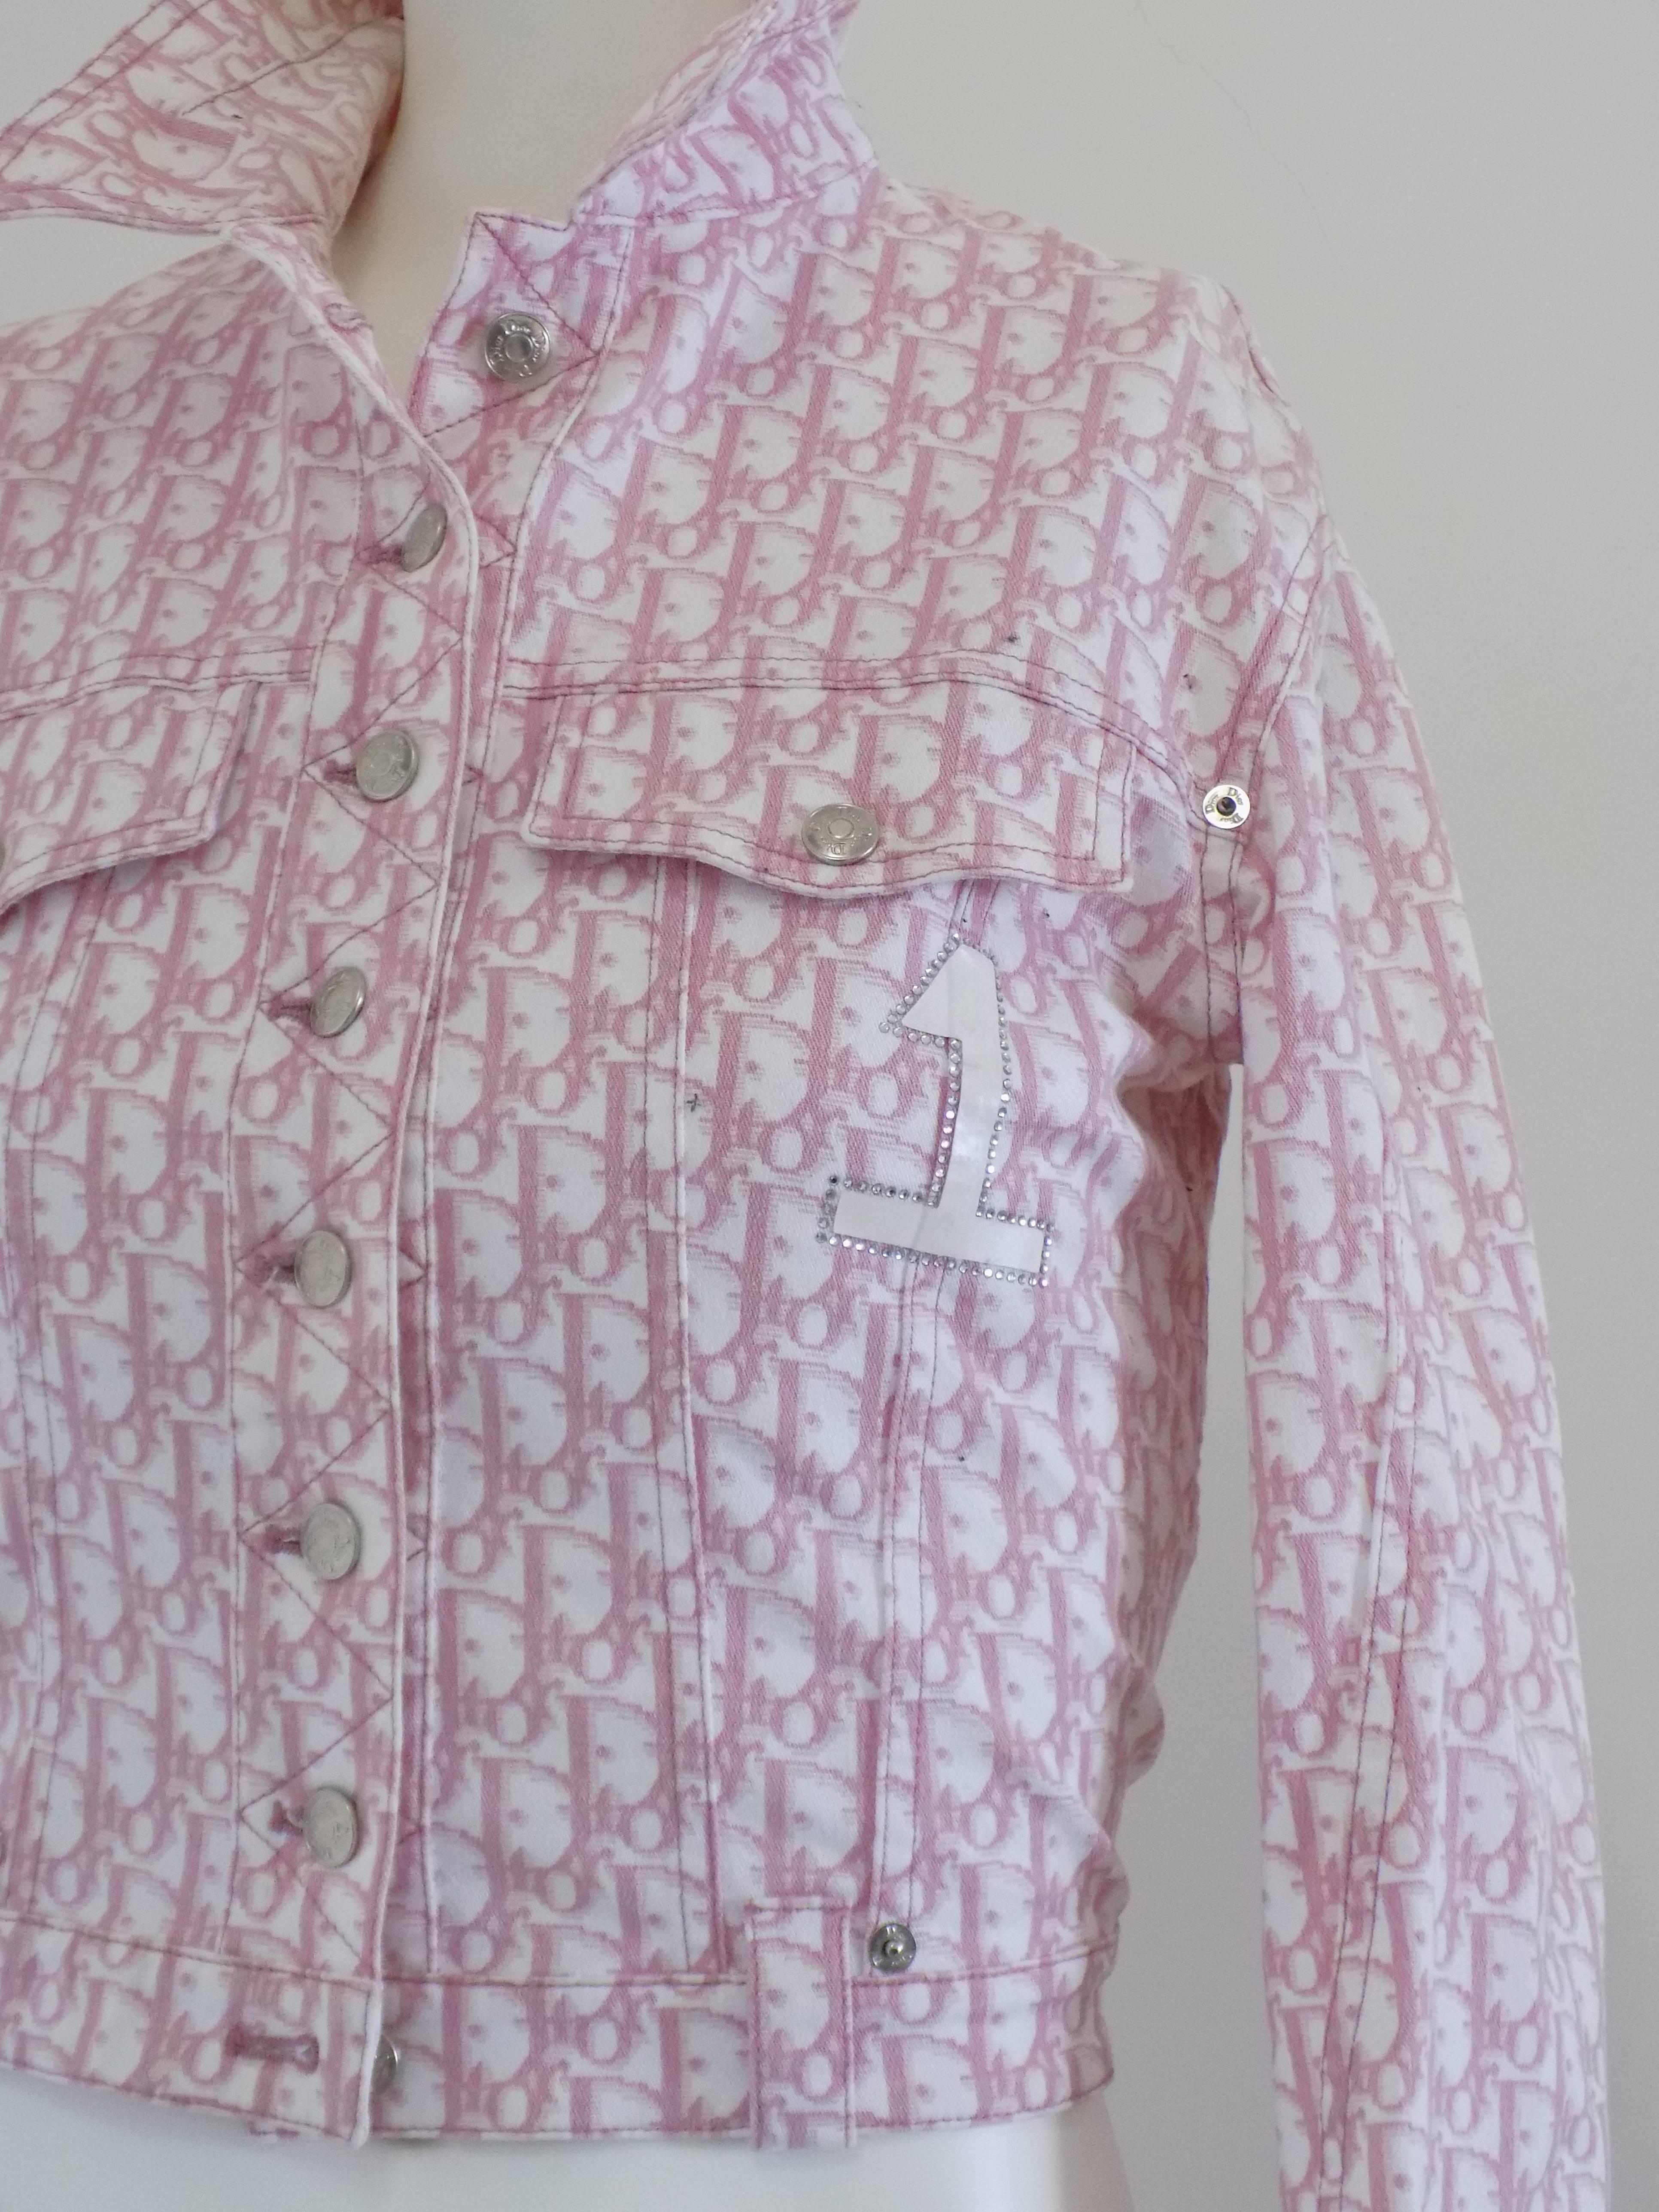 Christian Dior Boutique Pink White monogram jacket
Classic collar, front button fastening, two chest patch pockets, belt loops.  Number 1 diamante application on the chest and diamante logo at the hem. 
Totally made in portugal in french size 38